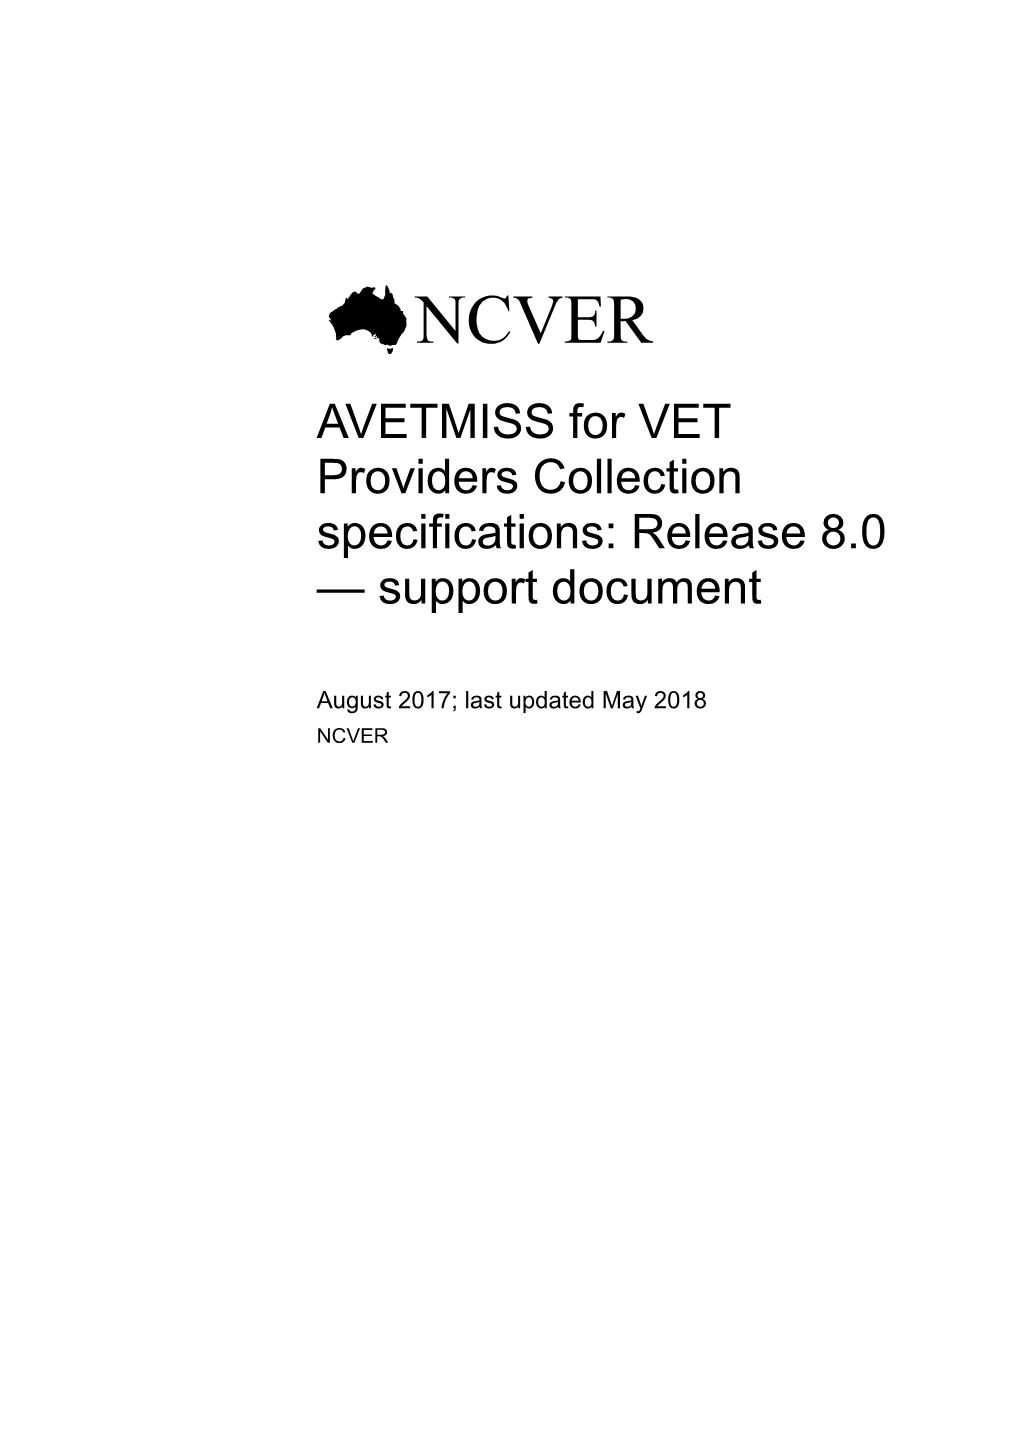 Amendments to AVETMISS for VET Providers Collection Specifications: Release 8.0